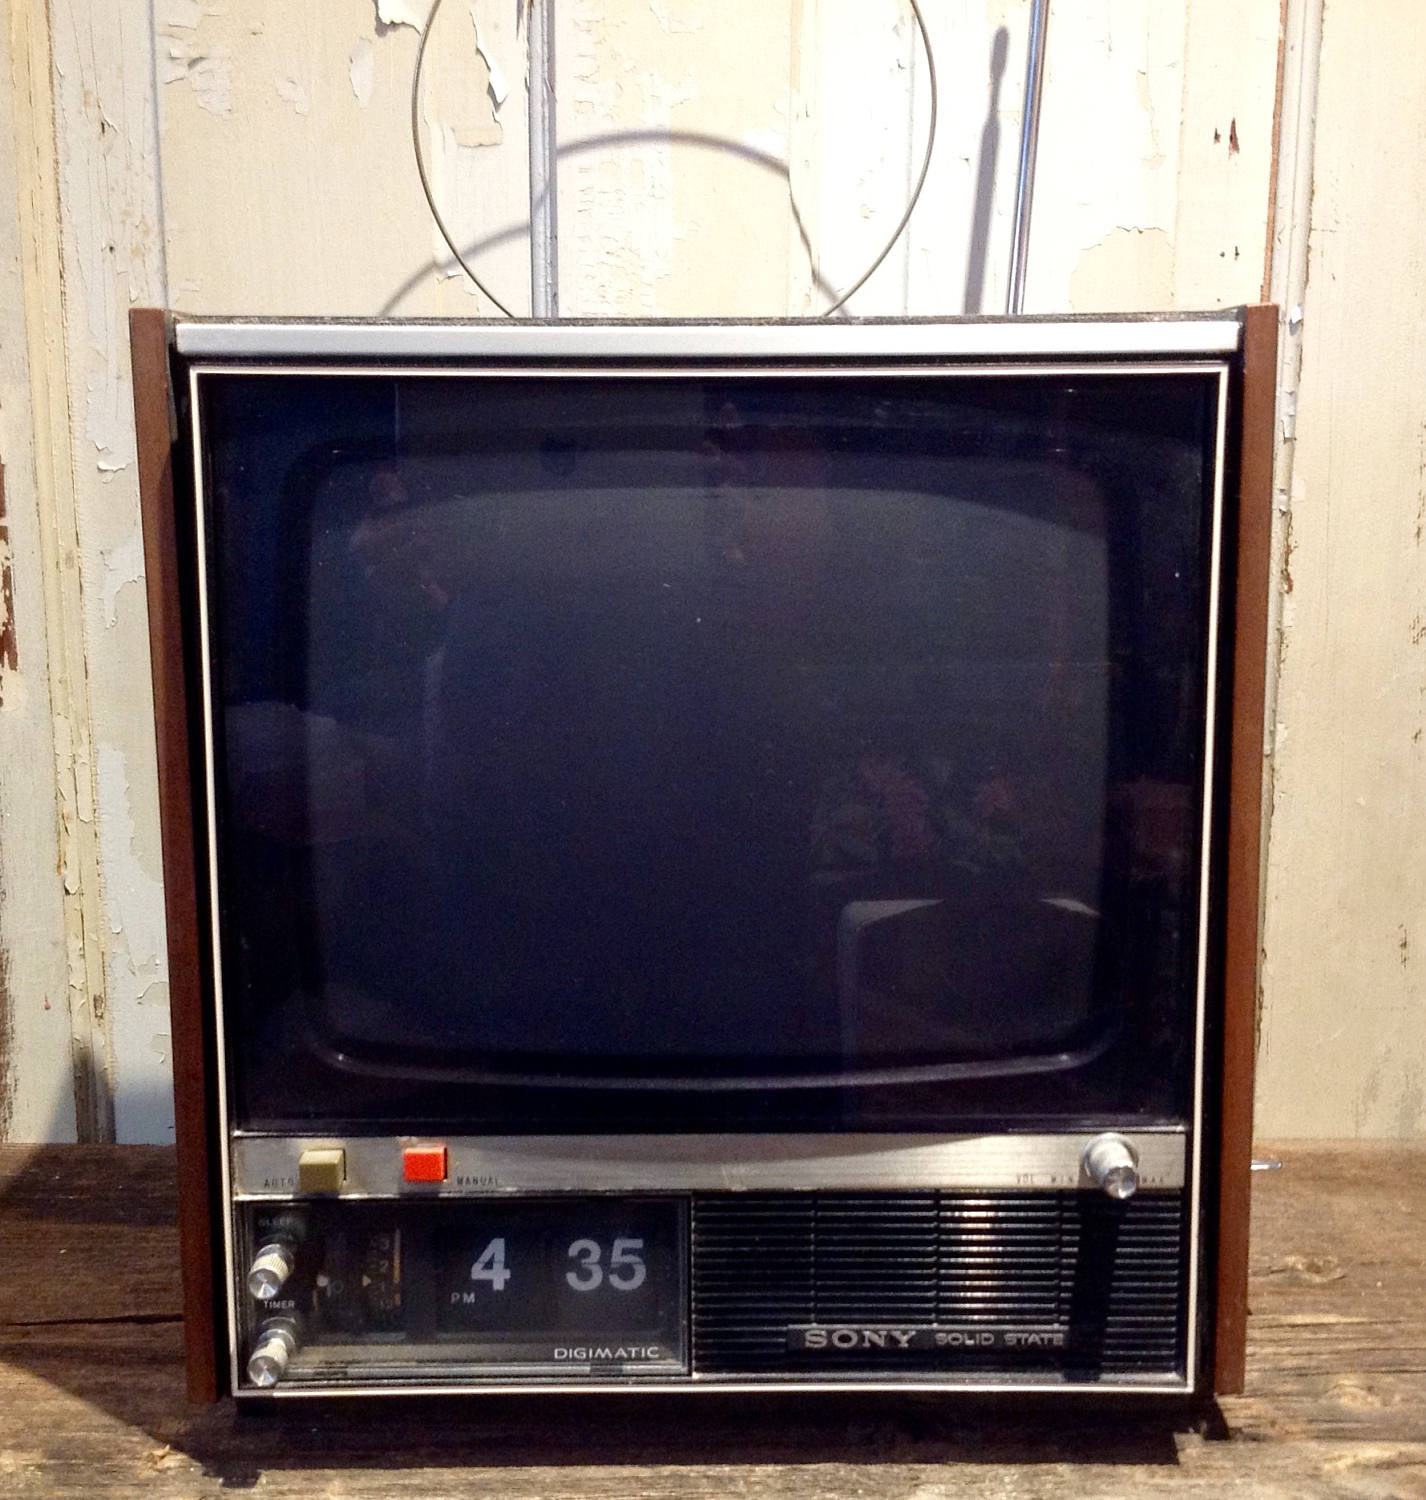 The SONY SOLID STATE Portable DIGIMATIC TELEVISION - Flip Clock Fans Forum